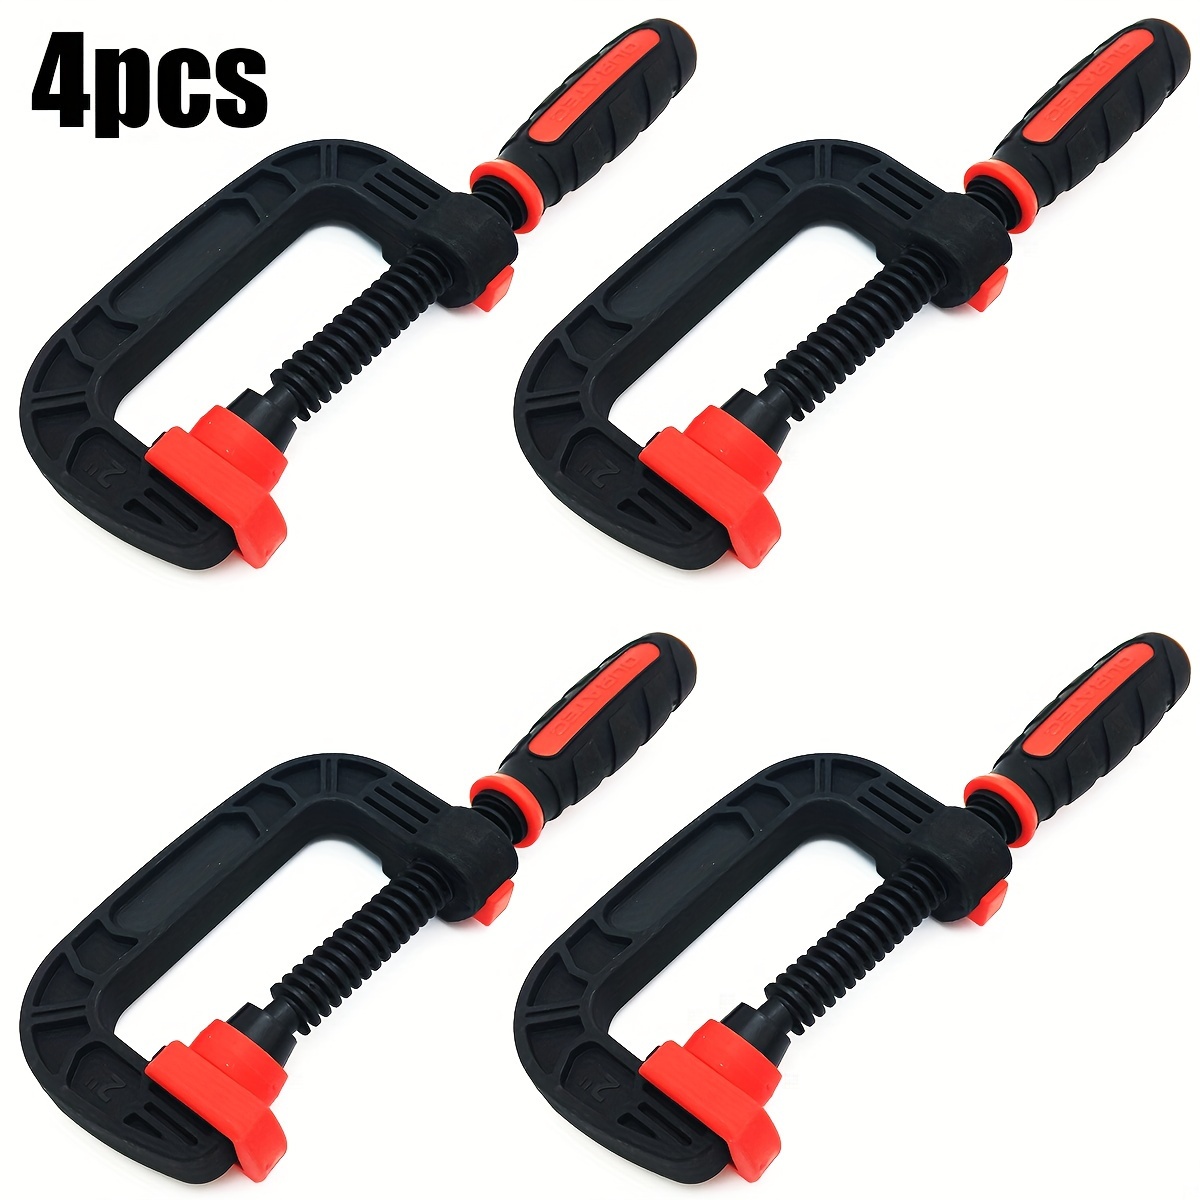 1pc Quick Grip Bar Clamps For Woodworking Projects Woodworking